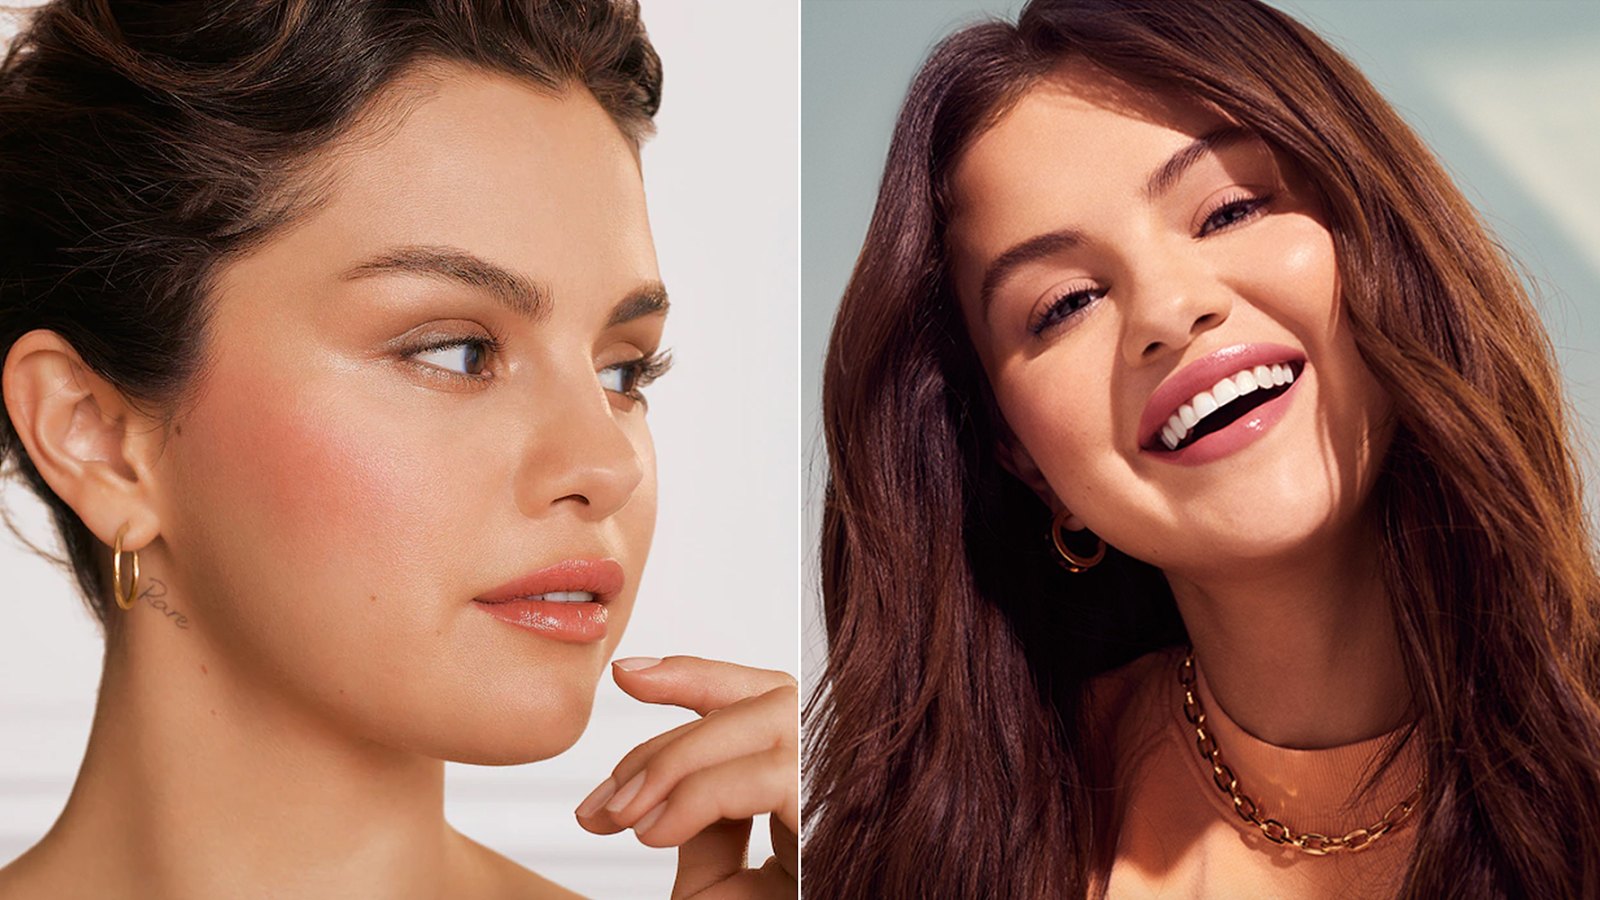 With Rare Beauty, Selena Gomez Is Making a Real Difference